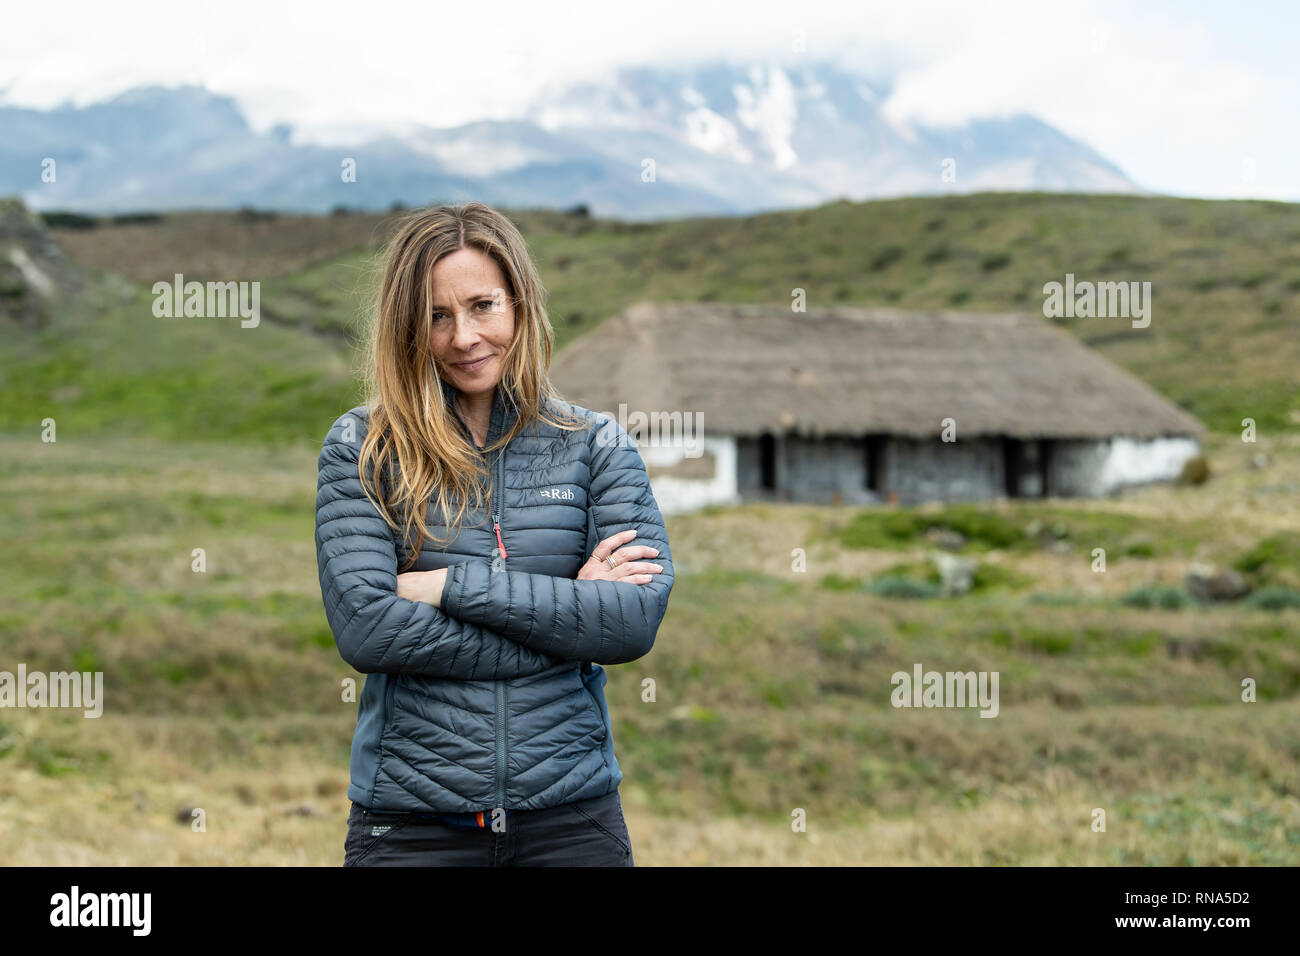 15 February 2019, Ecuador, Antisana: Art historian Andrea Wulff, author of the book 'Alexander von Humboldt and the Invention of Nature', stands in front of the Alexander von Humboldt-Hütte in the Antisana Nature Reserve and National Park on the occasion of the visit of Federal President Steinmeier and his wife. Federal President Steinmeier and his wife are visiting Colombia and Ecuador on the occasion of Alexander von Humboldt's 250th birthday as part of a five-day trip to Latin America. Wulf is a guest member of the delegation of the Federal President. Photo: Bernd von Jutrczenka/dpa Stock Photo